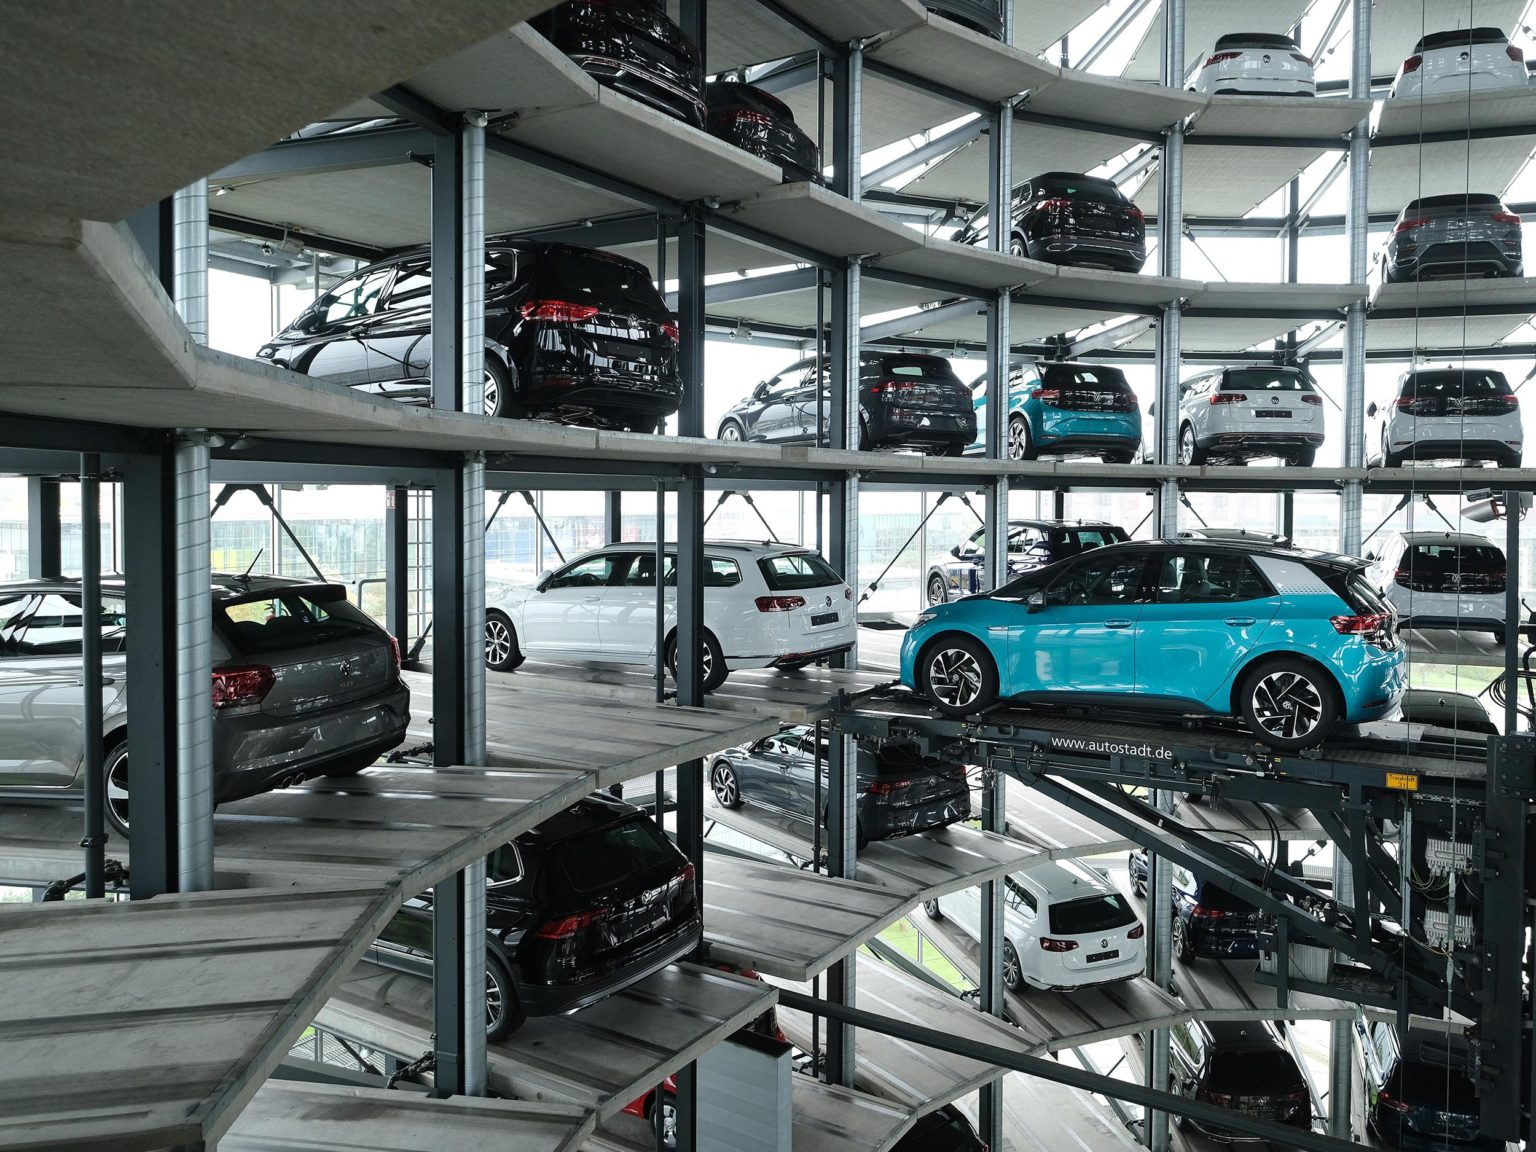 A Volkswagen ID.3 electric car stands on an elevator platform inside one of the twin towers used as storage at the Autostadt promotional facility next to the Volkswagen factory on October 26, 2020 in Wolfsburg, Germany. The facility contains a multi-brand museum.